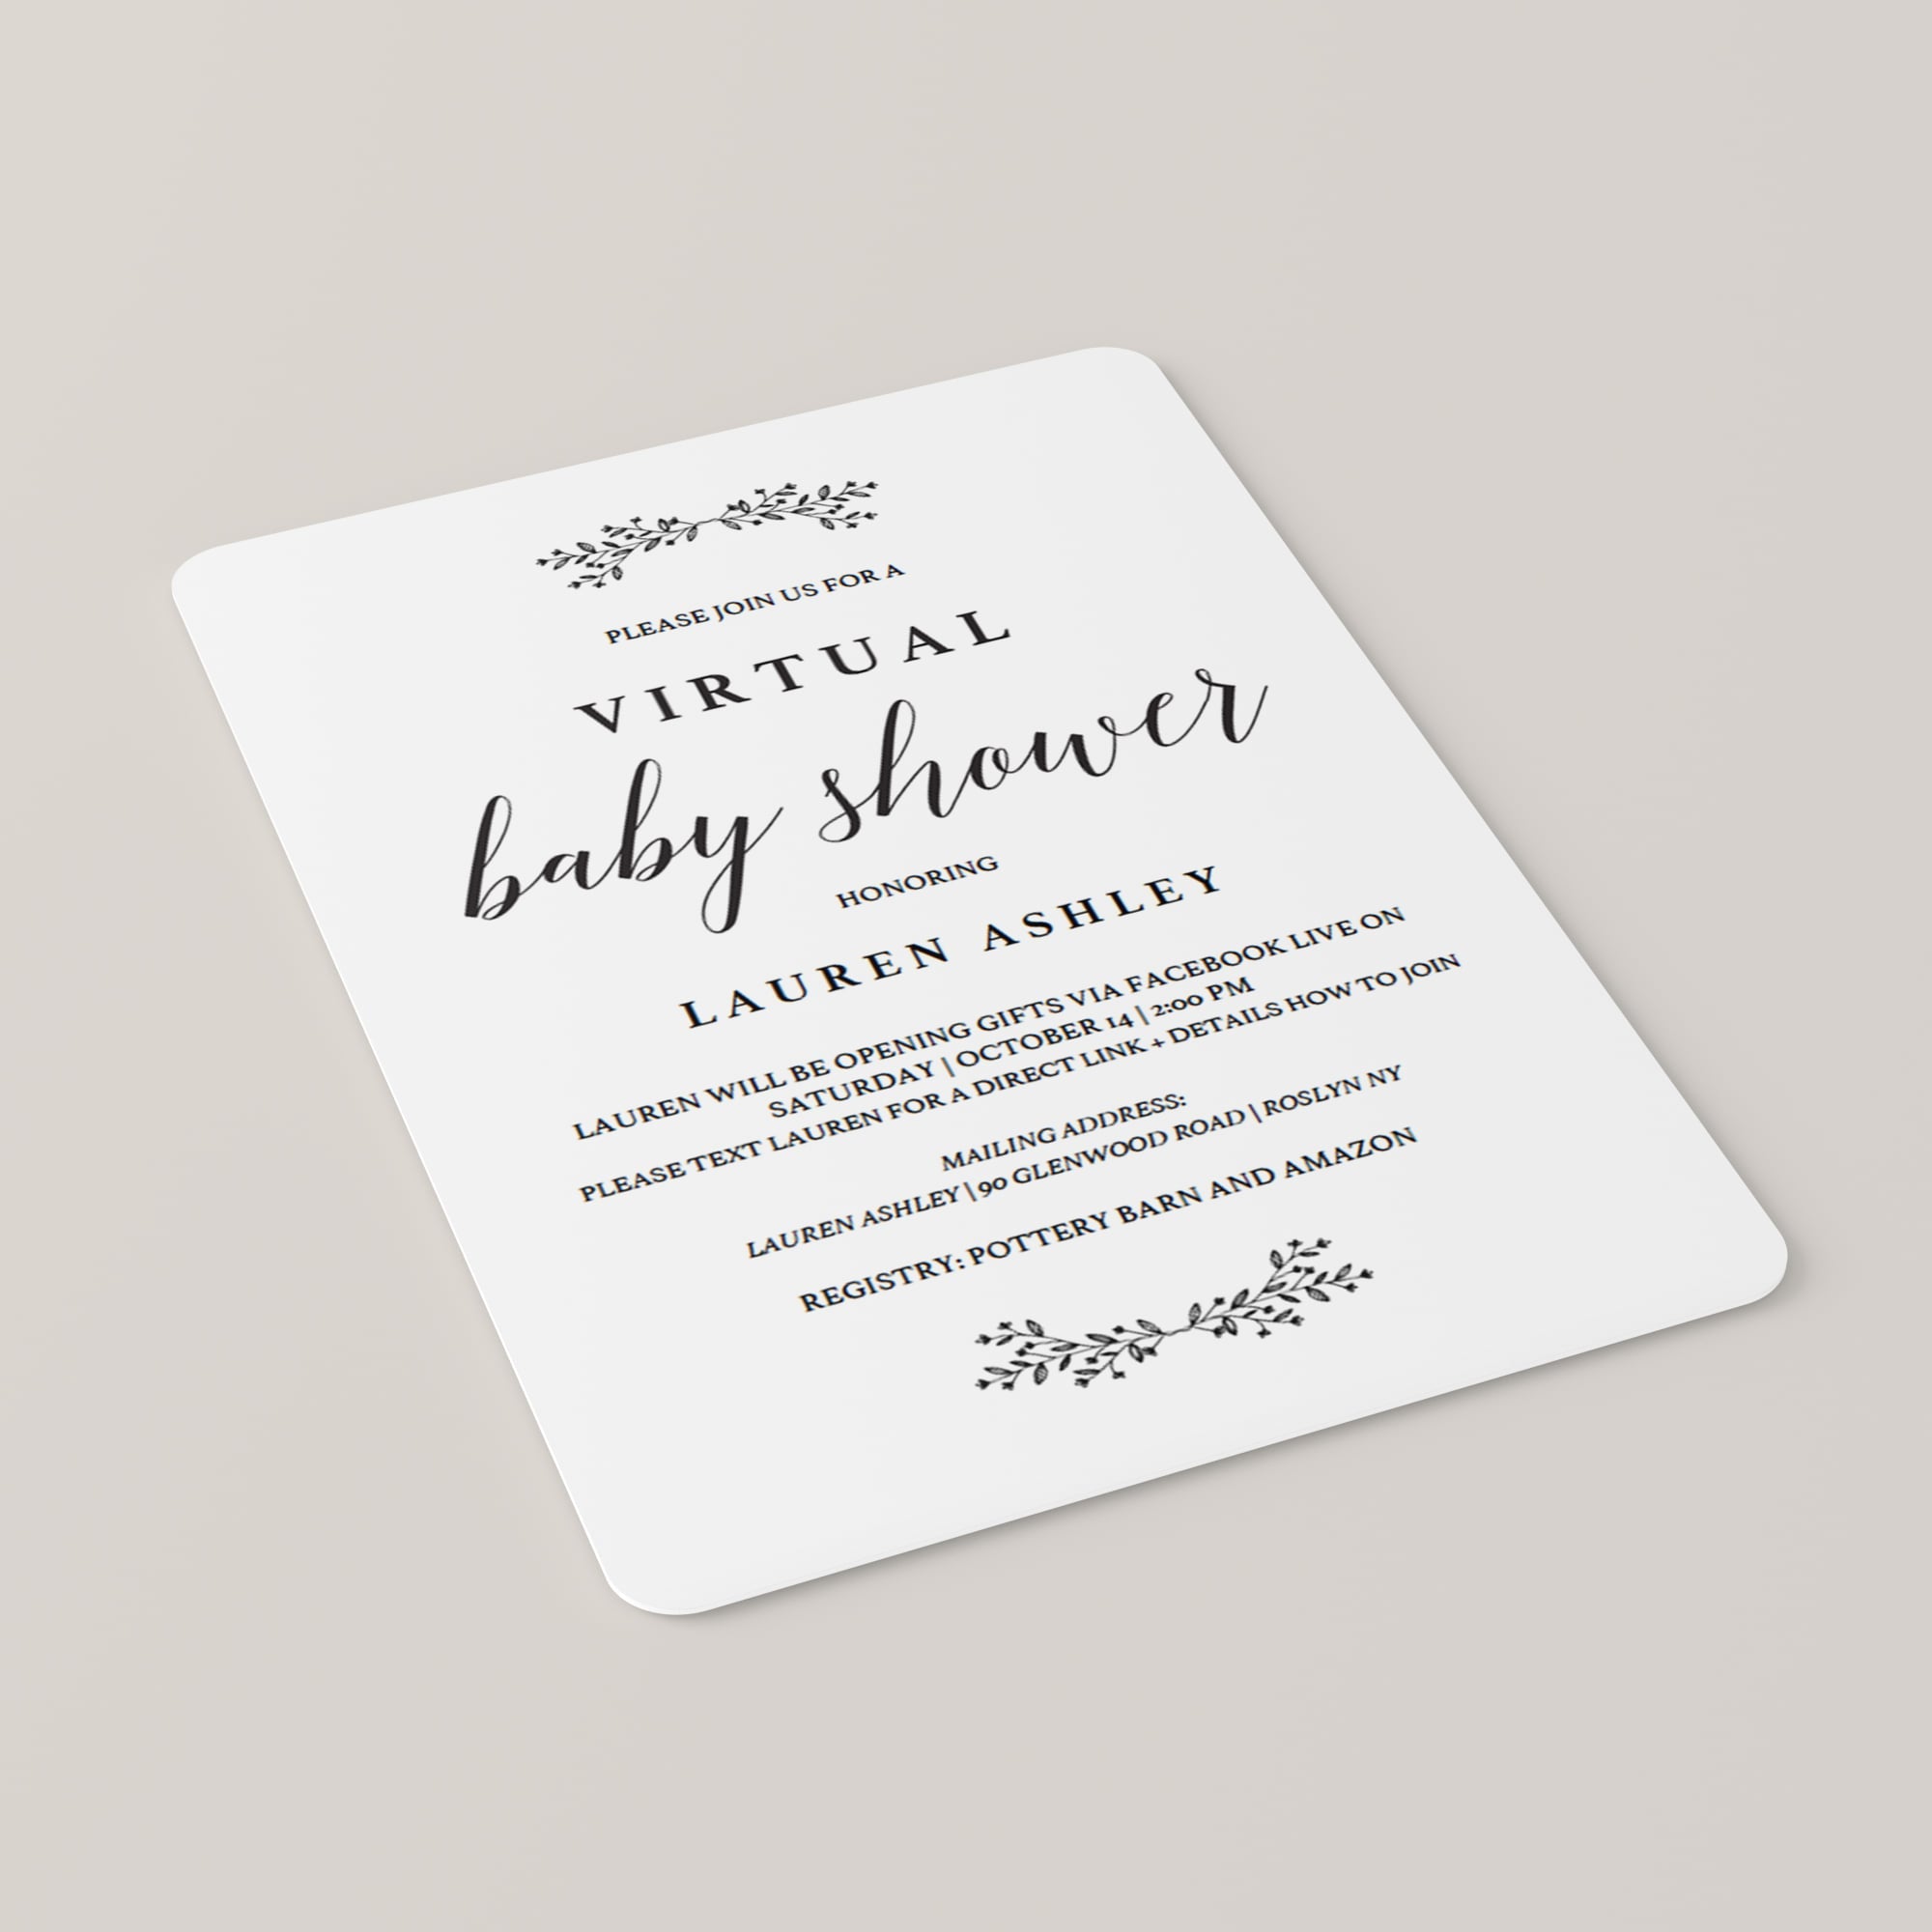 Virtual baby shower invite editable pdf template by LittleSizzle